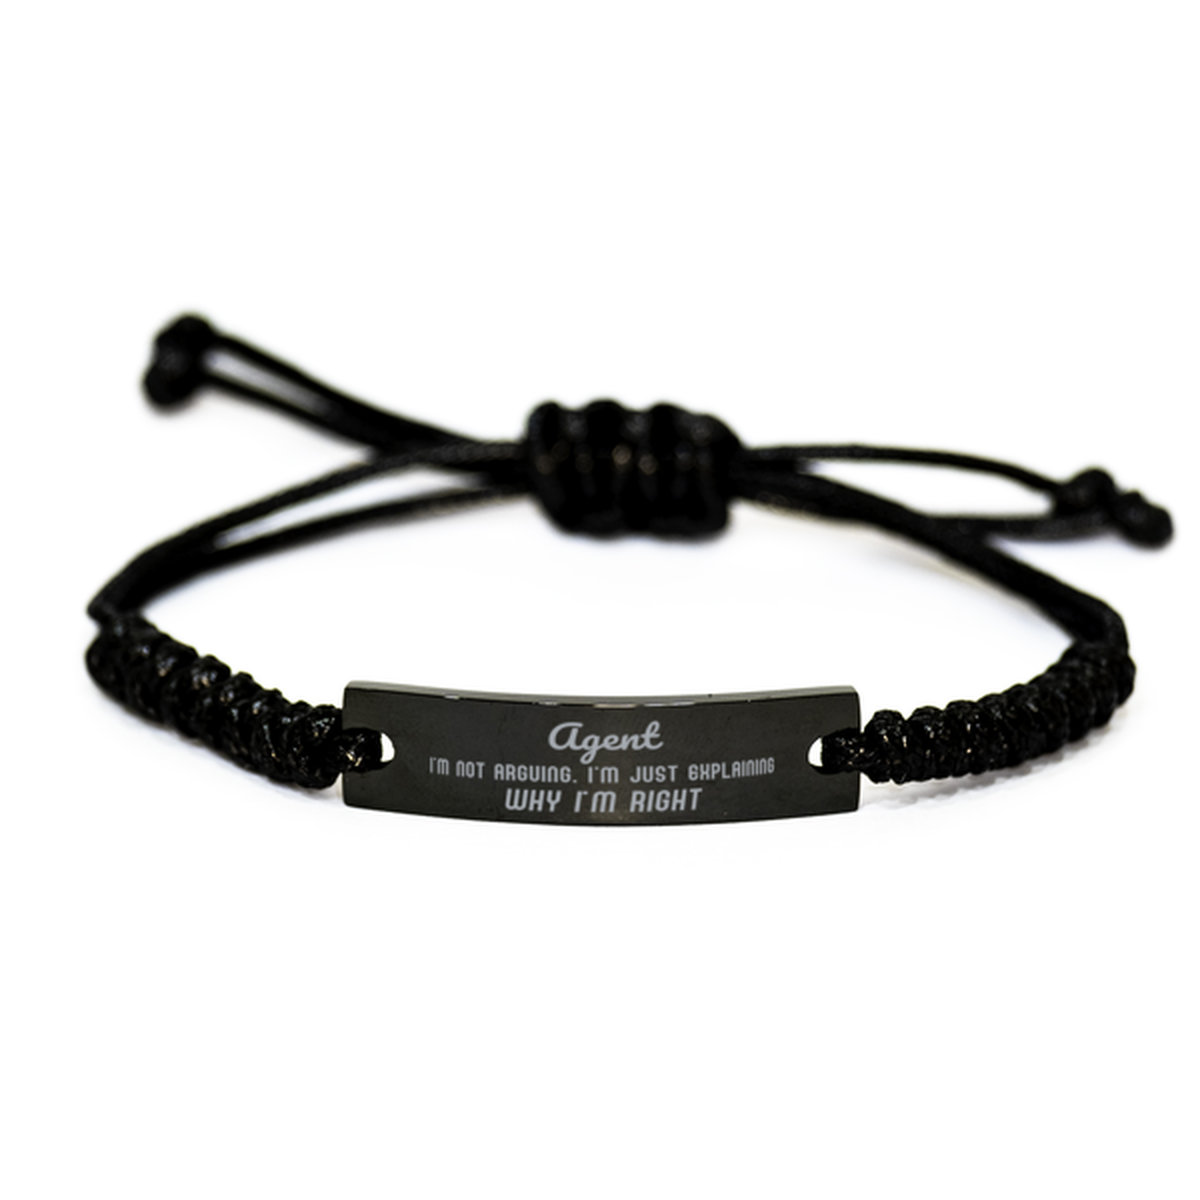 Agent I'm not Arguing. I'm Just Explaining Why I'm RIGHT Black Rope Bracelet, Funny Saying Quote Agent Gifts For Agent Graduation Birthday Christmas Gifts for Men Women Coworker